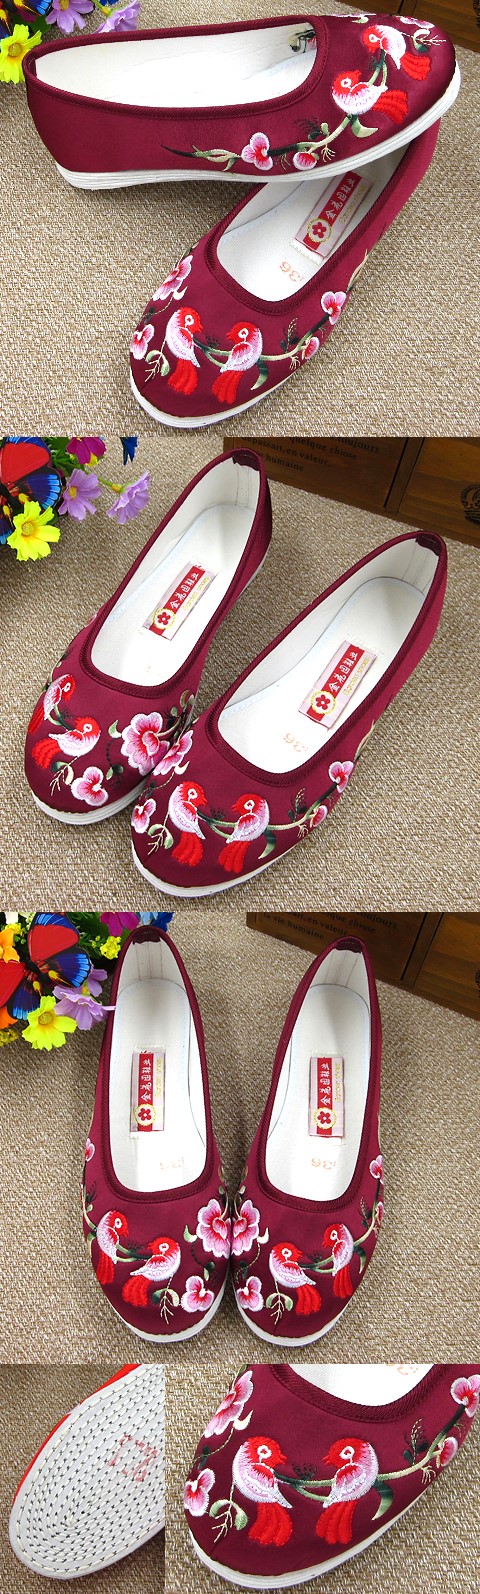 Satin Flower and Bird Embroidery Shoes (Violet Red)